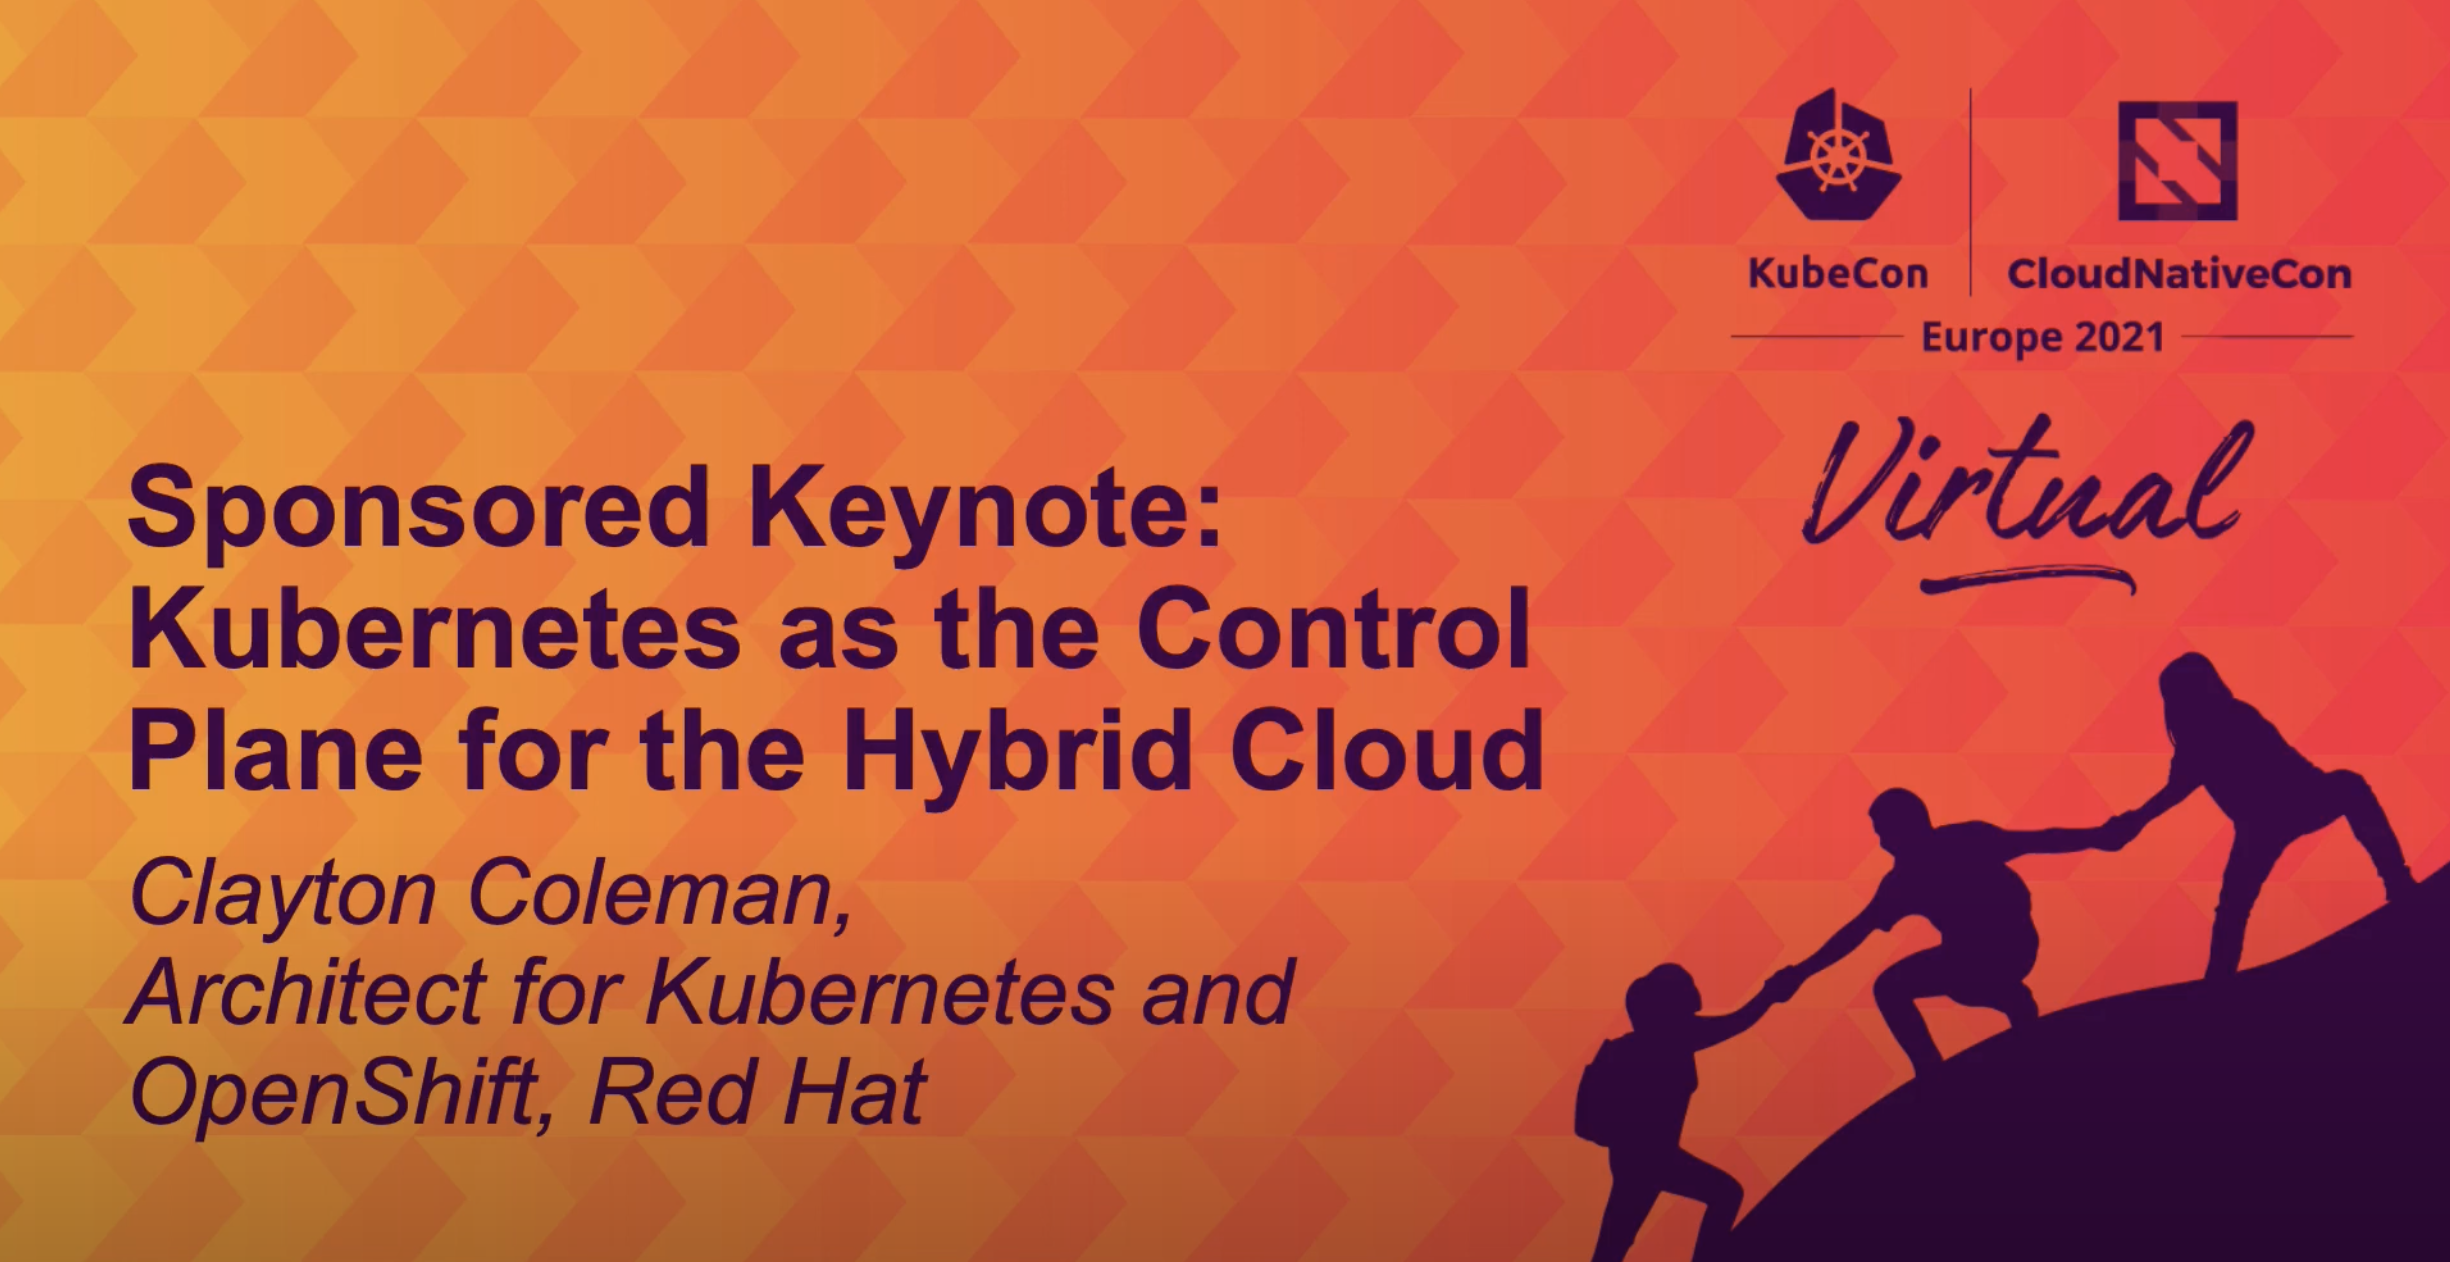 Kubernetes as the Control Plane for the Hybrid Cloud